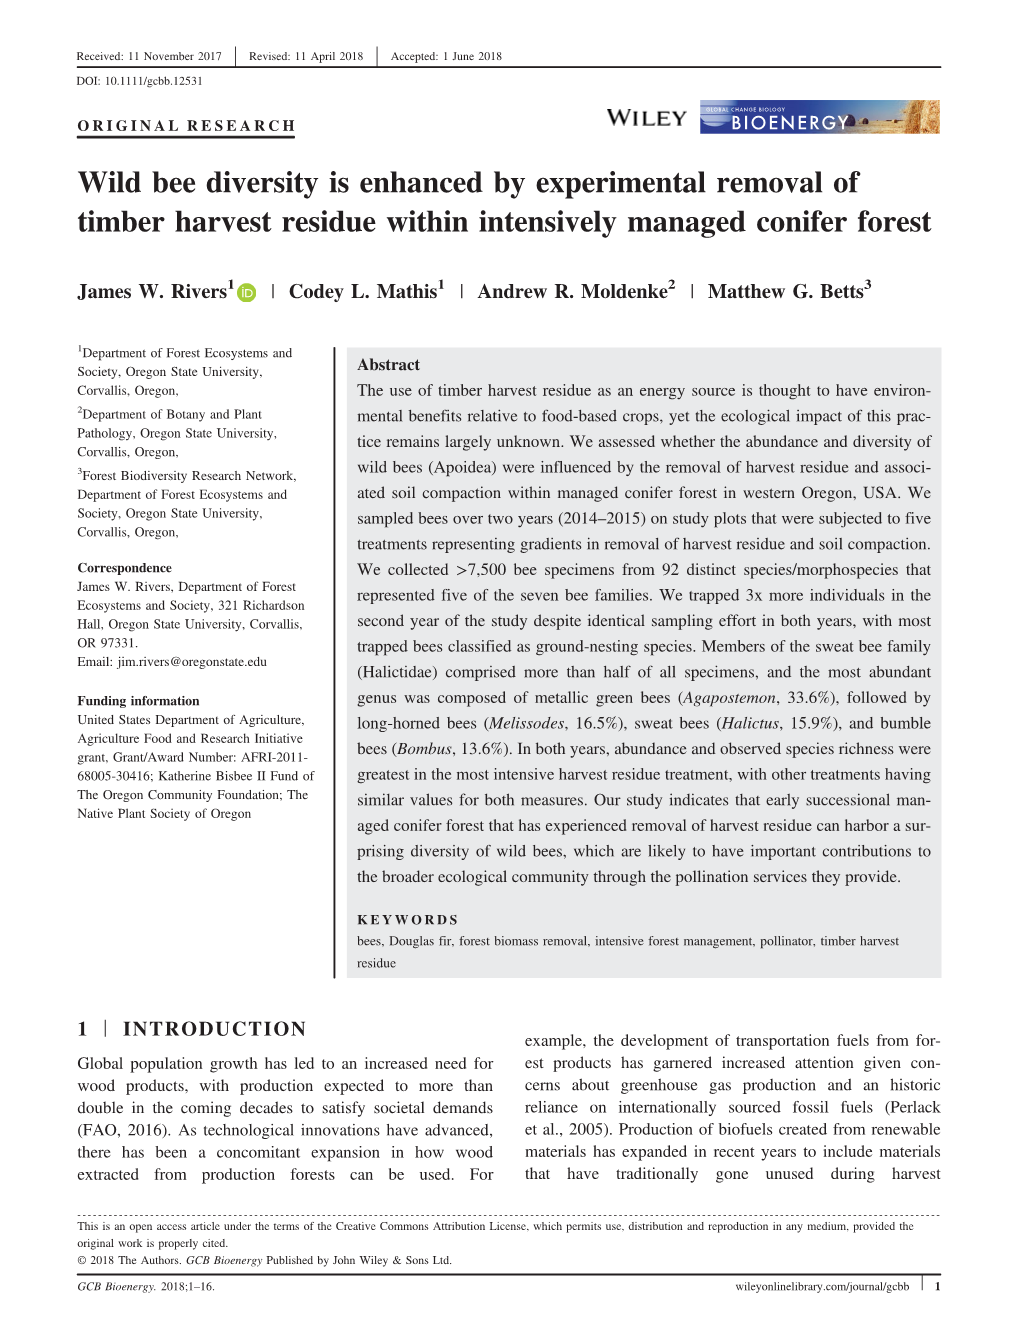 Wild Bee Diversity Is Enhanced by Experimental Removal of Timber Harvest Residue Within Intensively Managed Conifer Forest